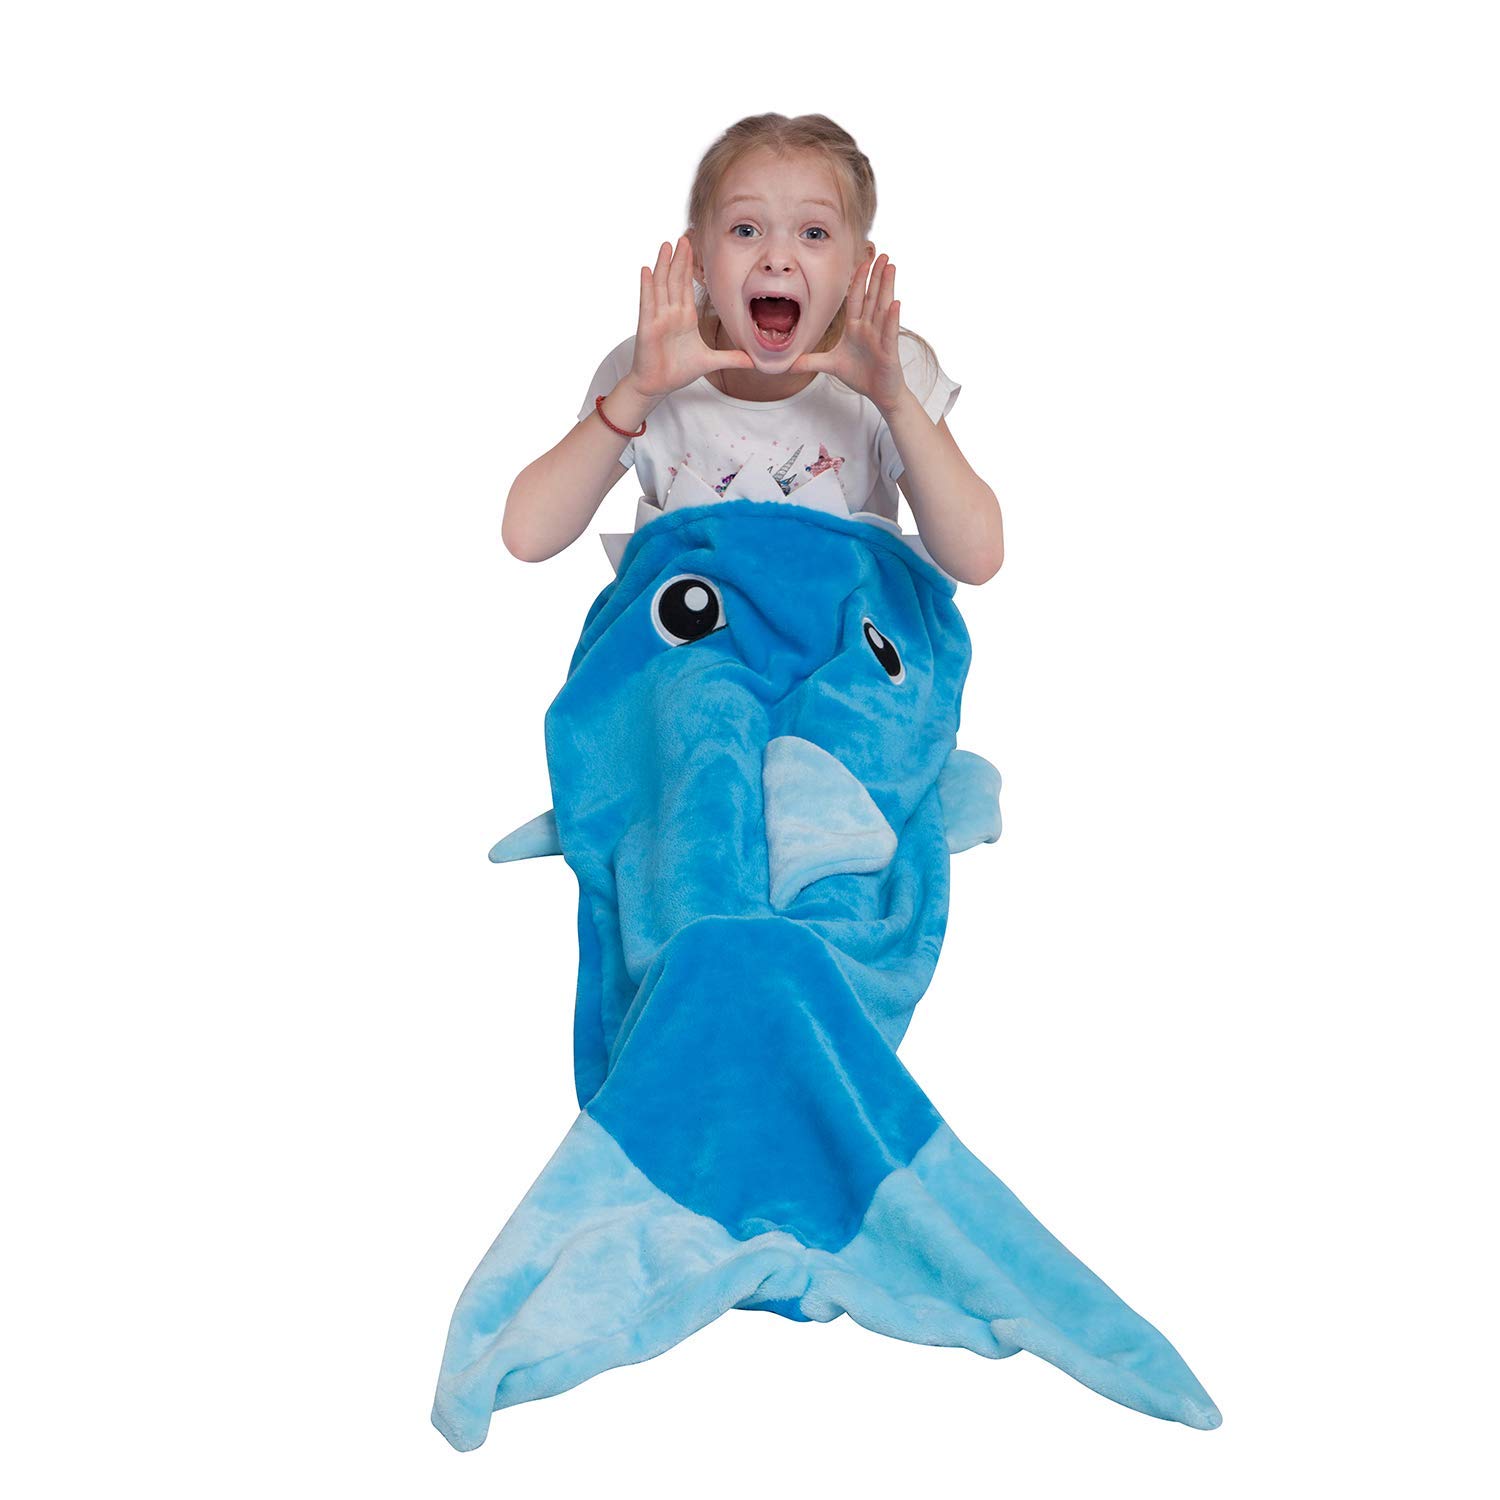 shark blanket, mermaid tail blanket, shark tail blanket, mermaid blanket, THE ULTIMATE GIFT GUIDE, GIFT GUIDE FOR WOMEN, GIFT GUIDE FOR MEN, GIFT GUIDE FOR KIDS, GIFT GUIDE FOR TEENS, CHRISTMAS WISHLIST, CHRISTMAS GIFT GUIDE, ULTIMATE GIFT GUIDE, GIFT GUIDE FOR EVERYONE ON YOUR LIST, HOLIDAY GIFT GUIDE